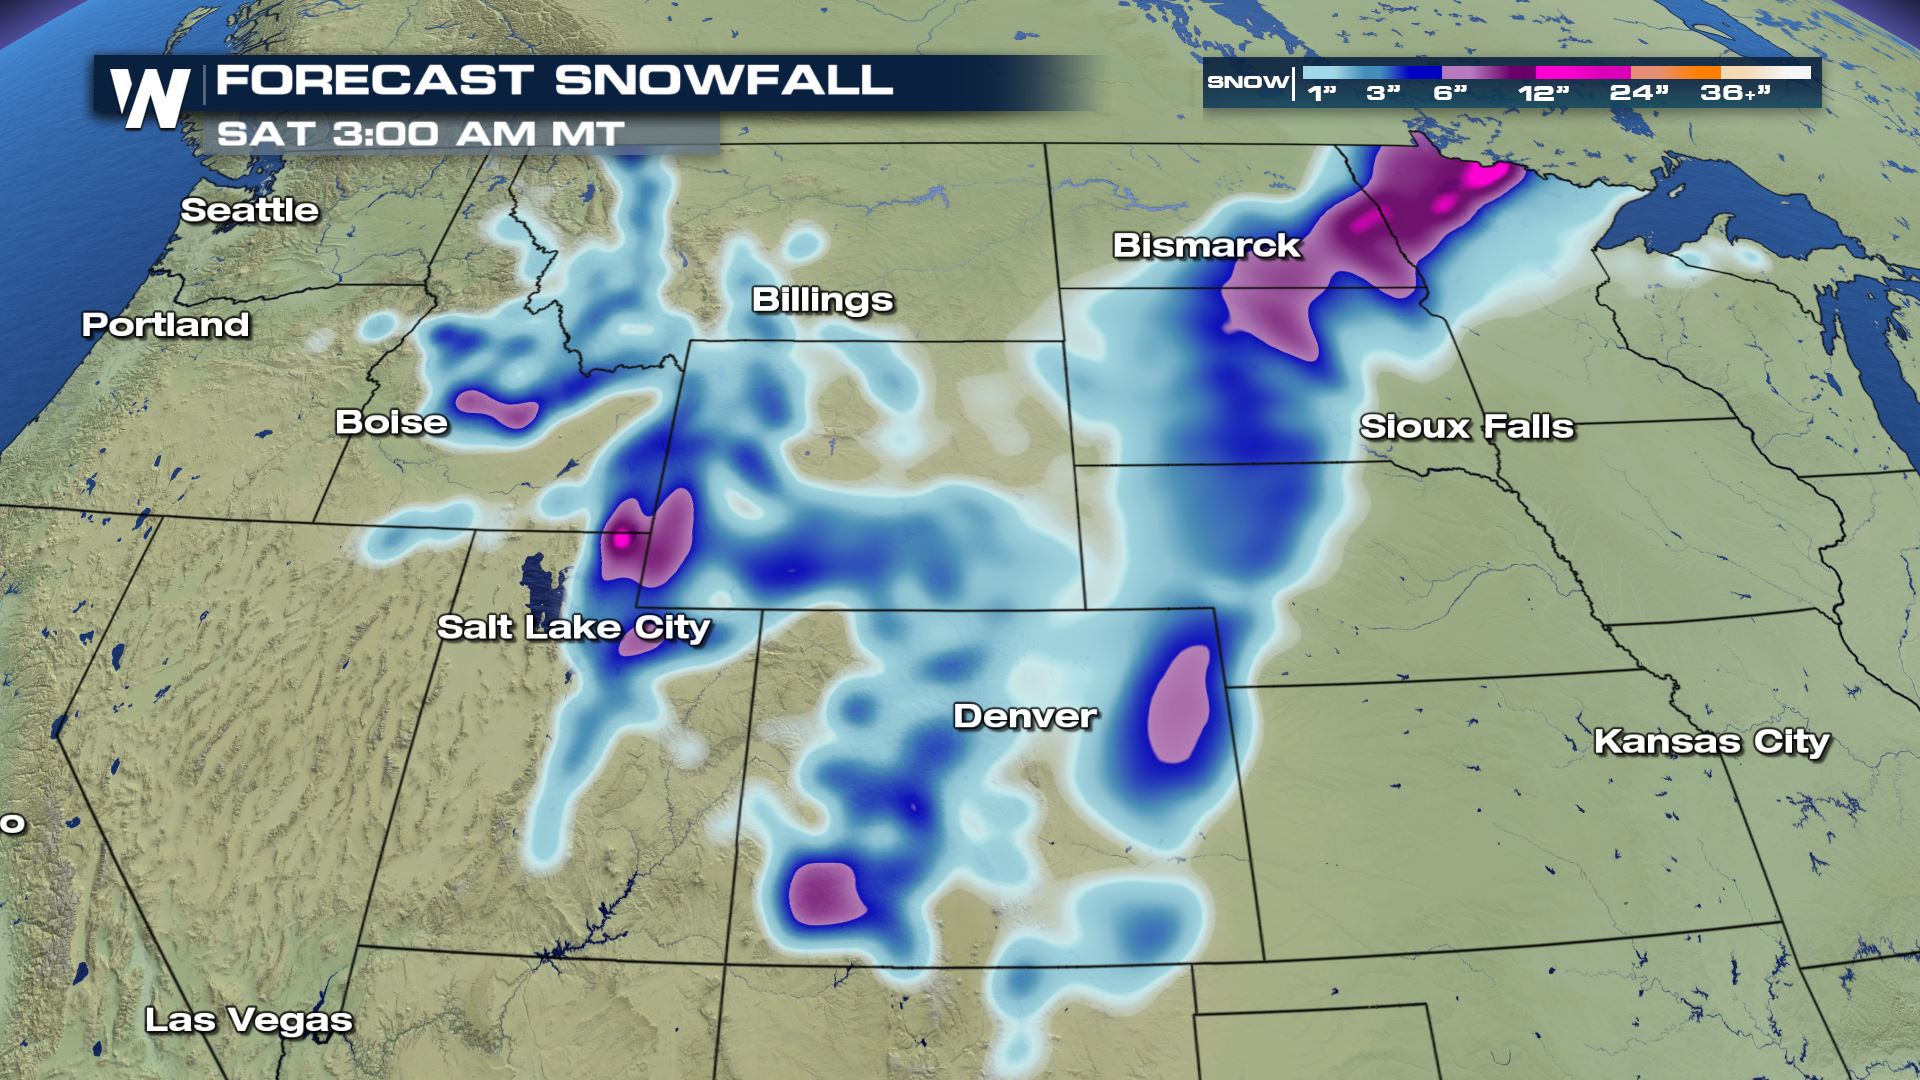 Winter Weather Continues Out West